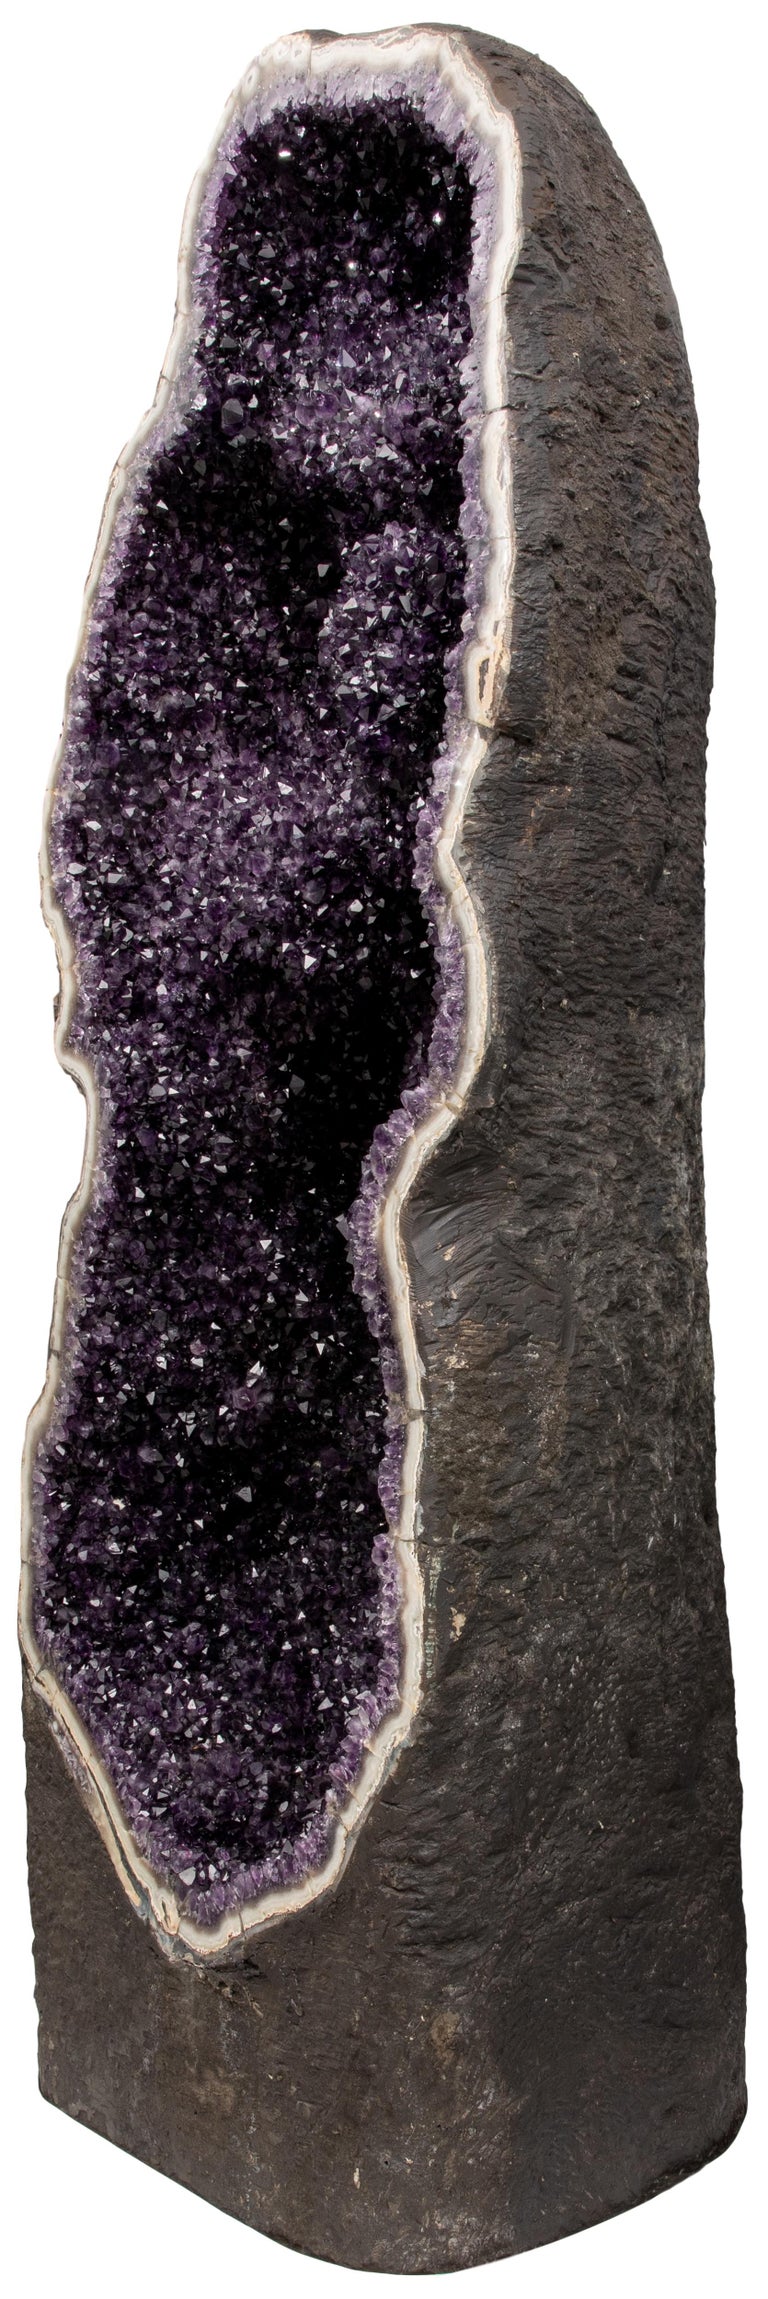 An exquisite and absolutely impressive large half geode, resembling a towering crystal column. 

This breath-taking piece represents one of the most exclusive amethyst formations to be presented for sale. Evoking a sense of elegant grandeur, the